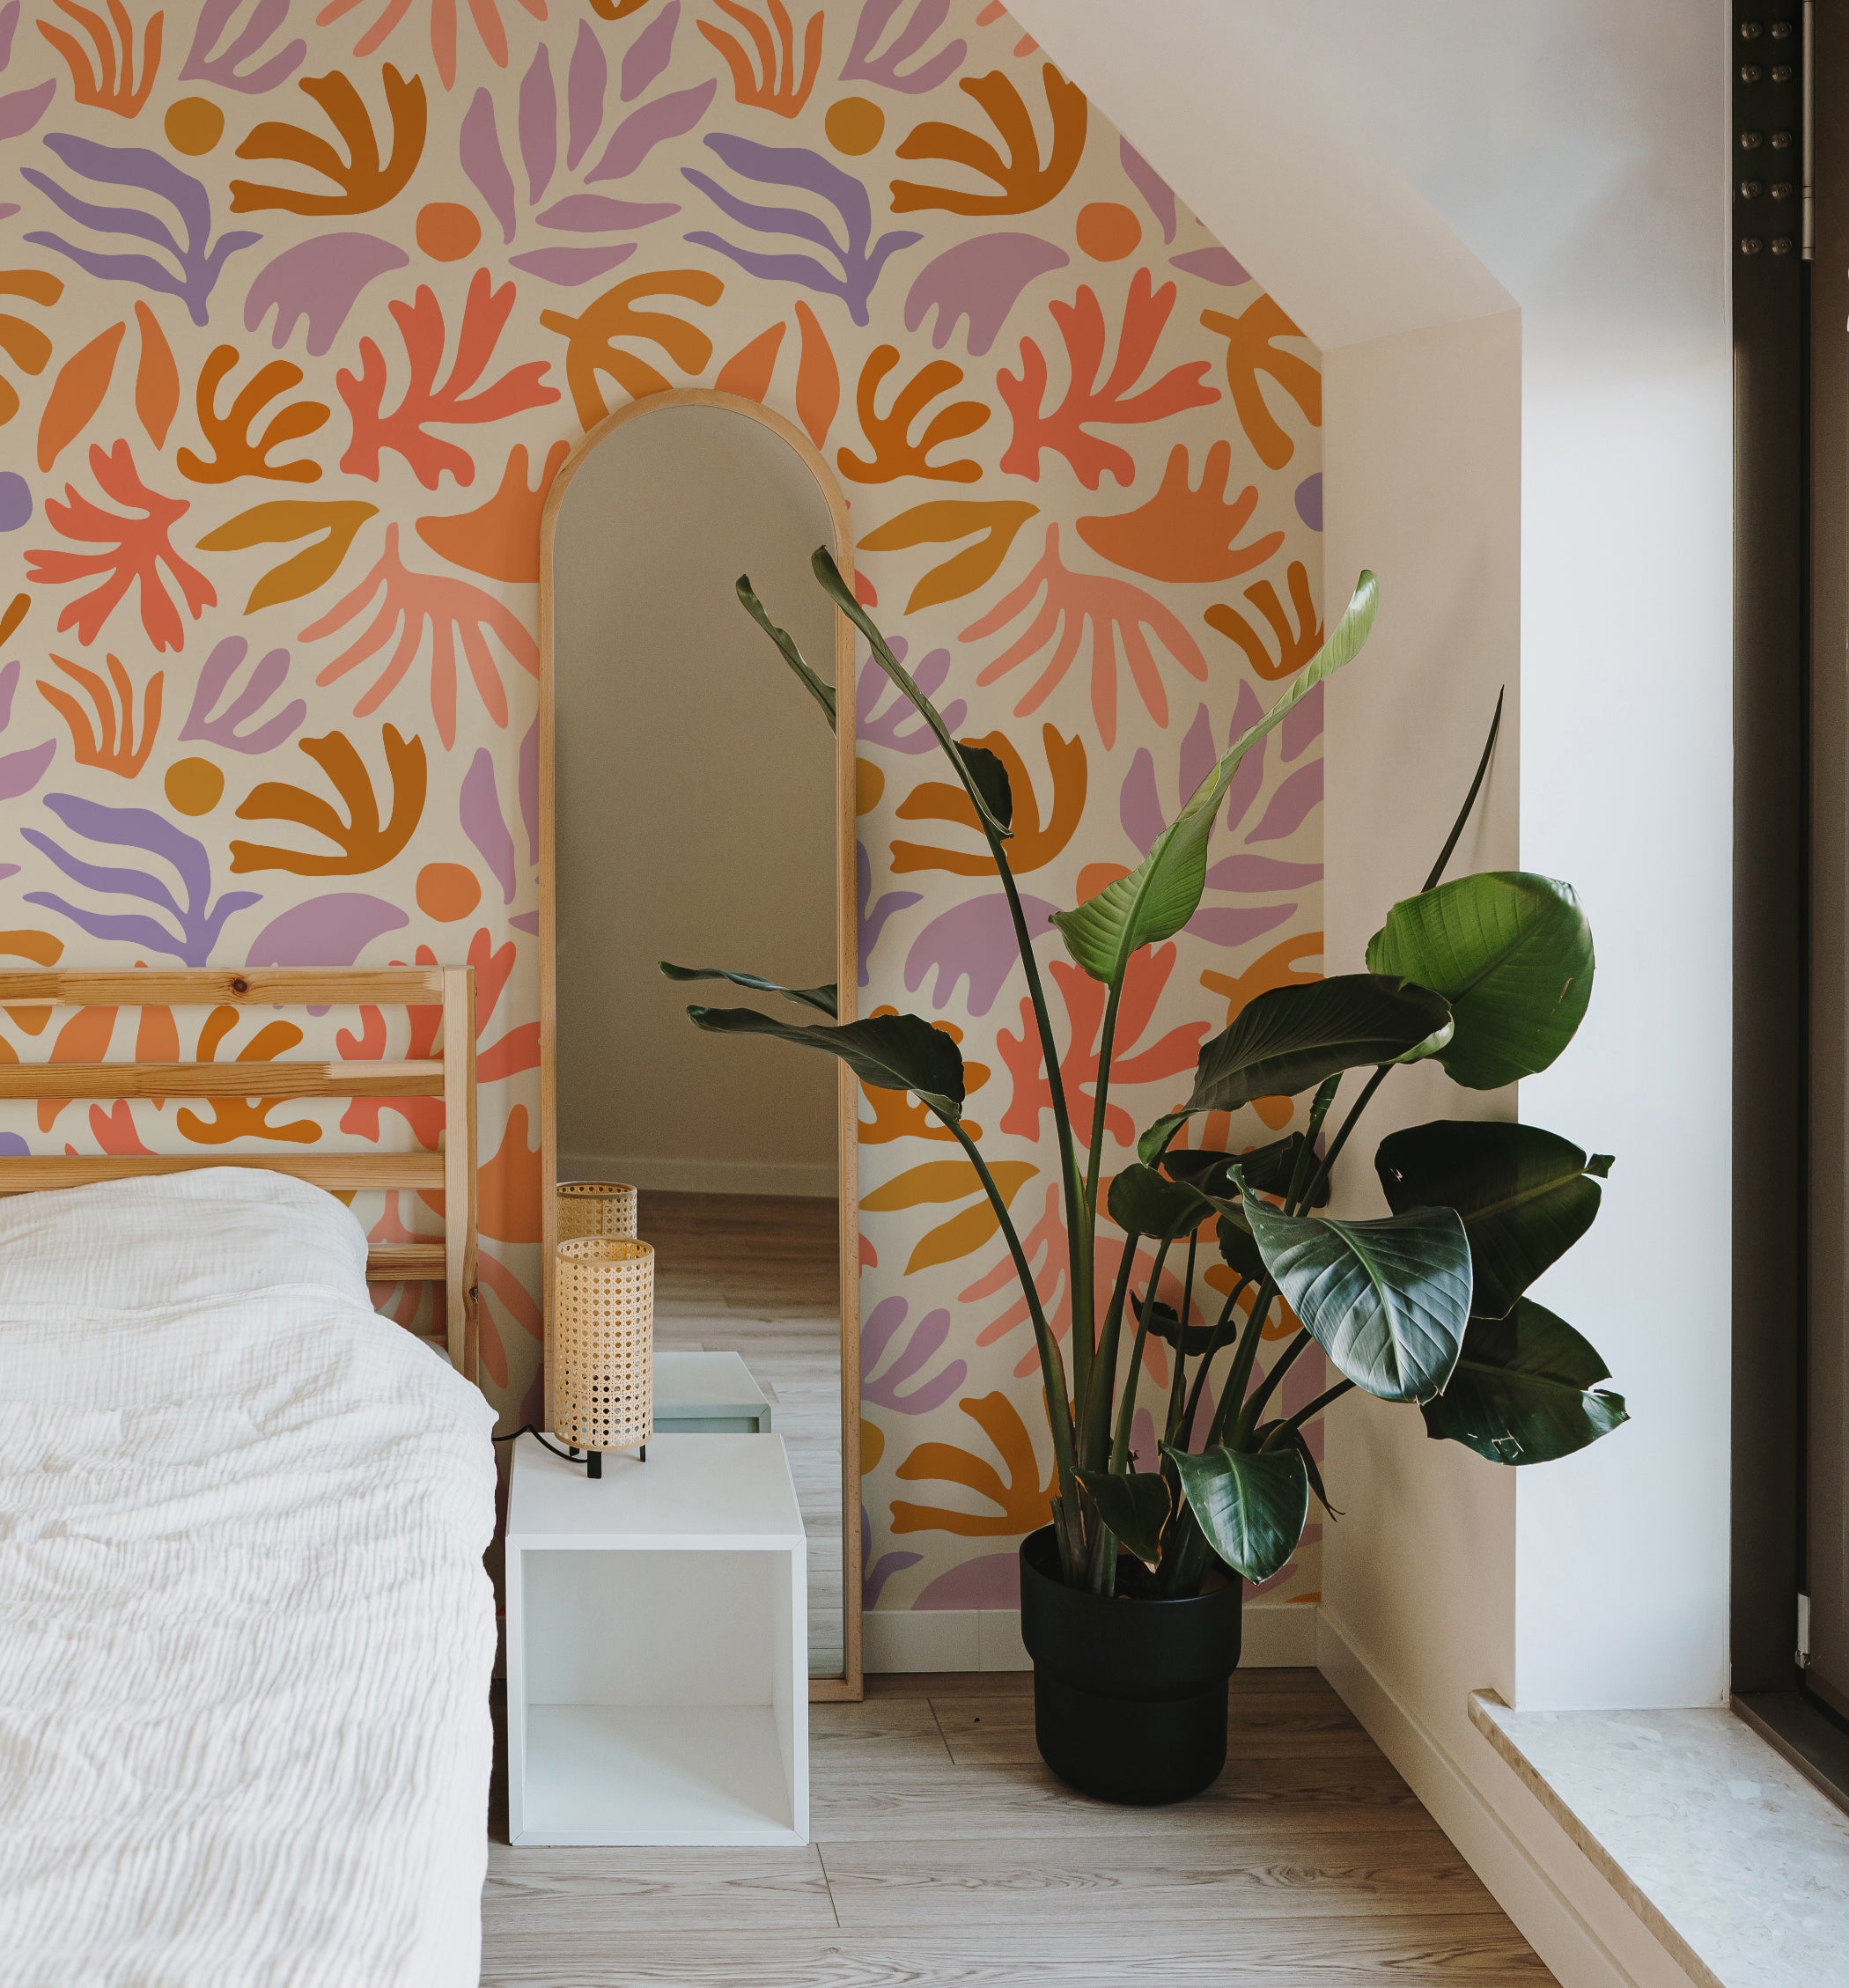 Cozy room corner showcasing an arch-shaped mirror and a large potted plant in front of a lively wallpaper with an abstract plant motif in warm tones